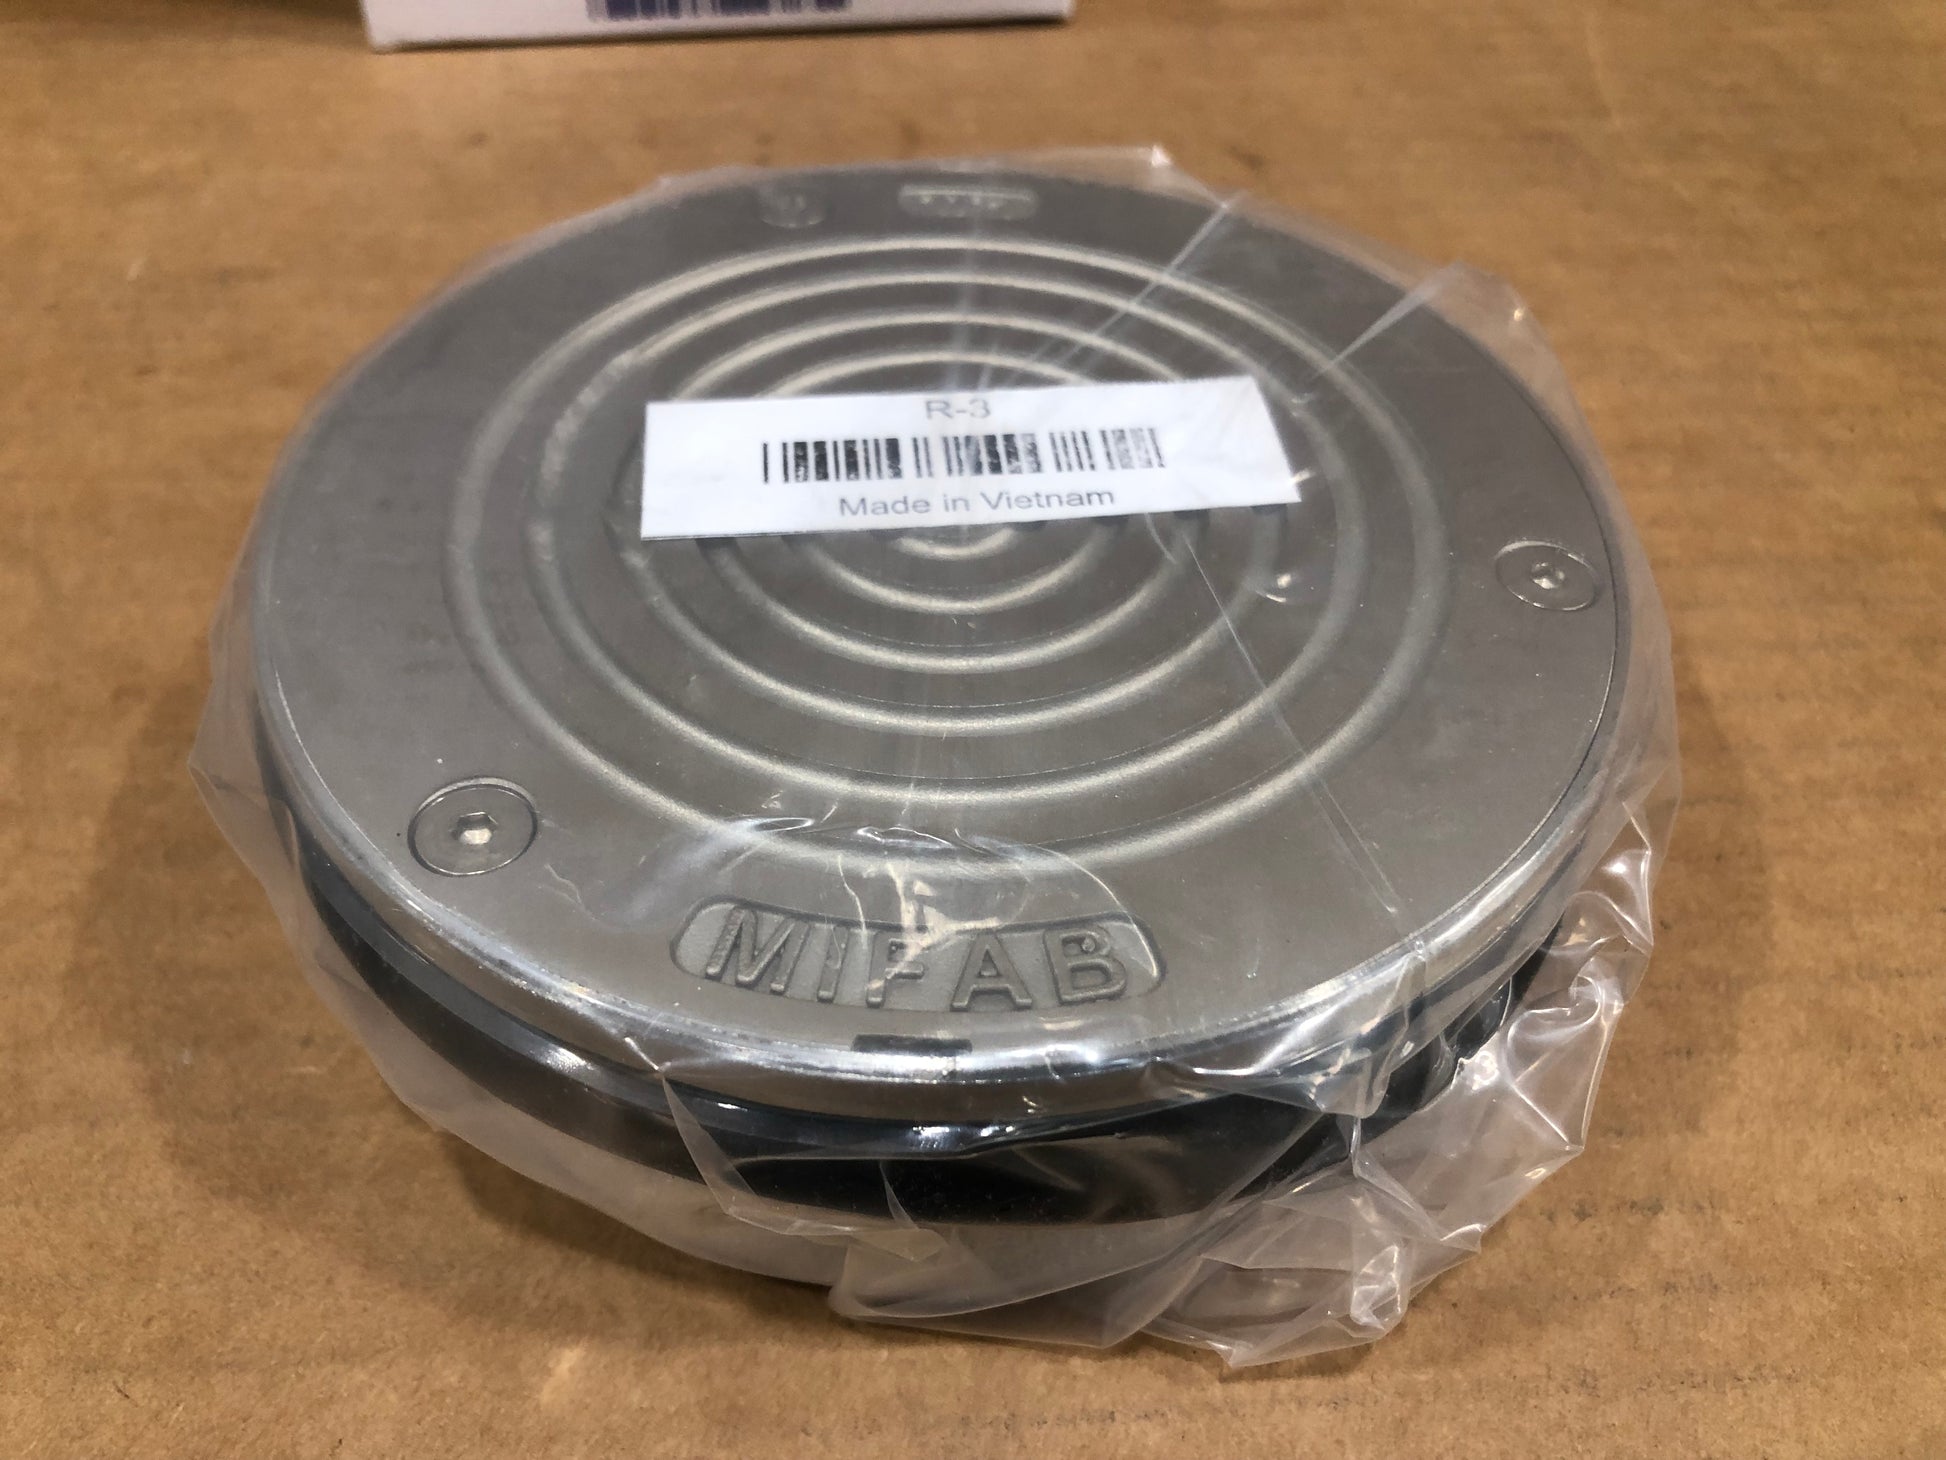 5" STAINLESS STEEL C.I. CLEANOUT HOUSING/COVER/FLANGE